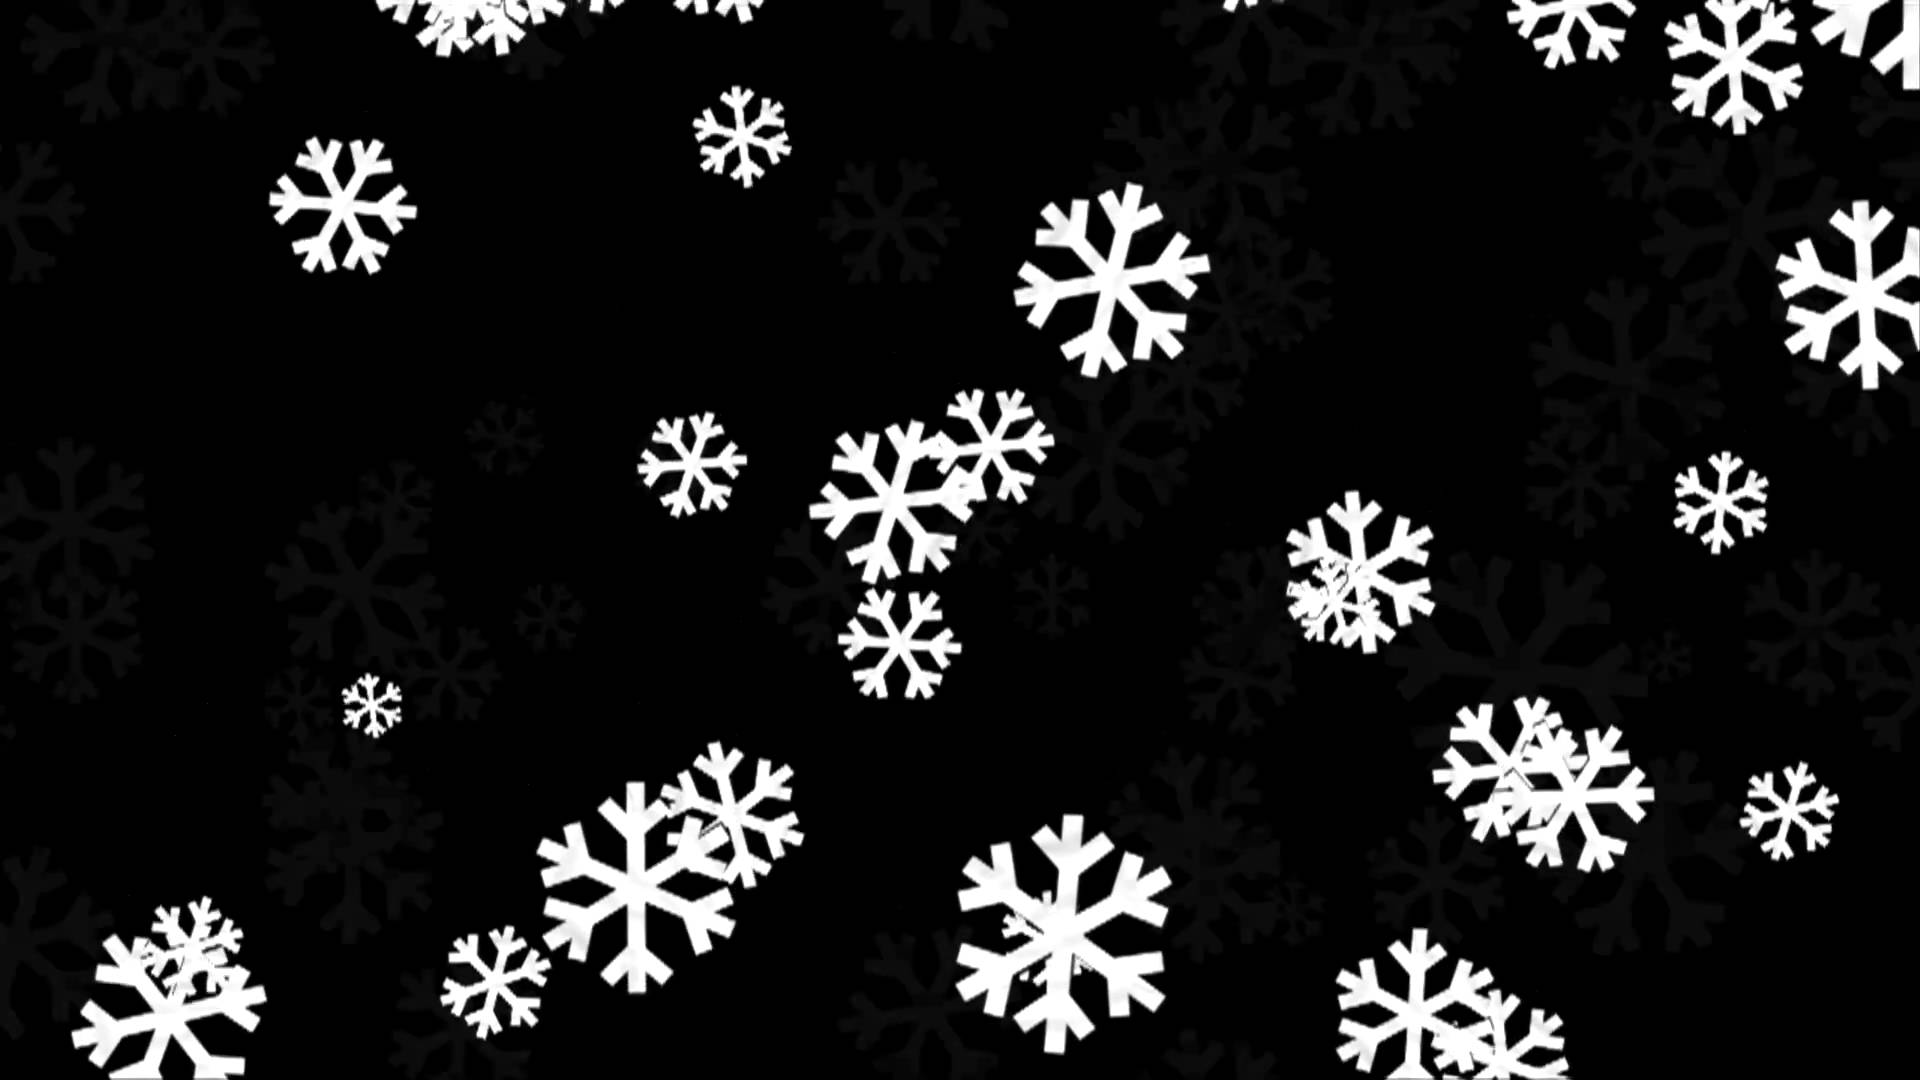 Snowflakes Clip art Falling Pink Snow Clipart Christmas Transparent PNG Snow Overlay Falling Winter Snow Overlay Commercial use